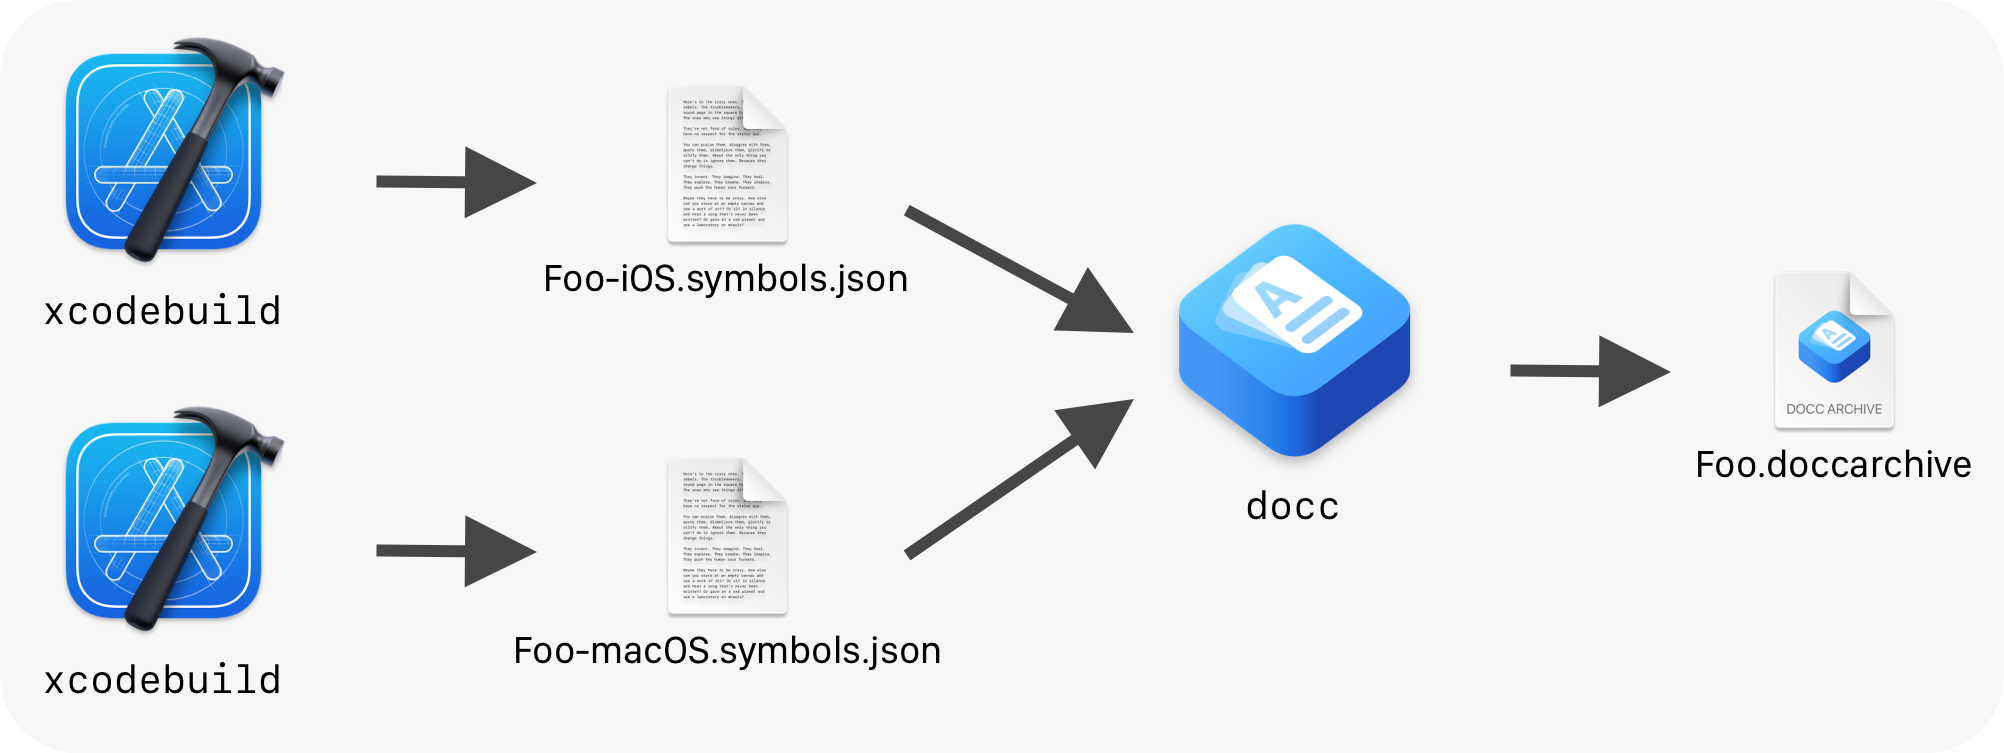 Illustration showing xcodebuild being invoked twice and outputting files named Foo-iOS.symbols.json and Foo-macOS.symbols.json which are then provided as input to the DocC tool that then outputs a file named Foo.doccarchive